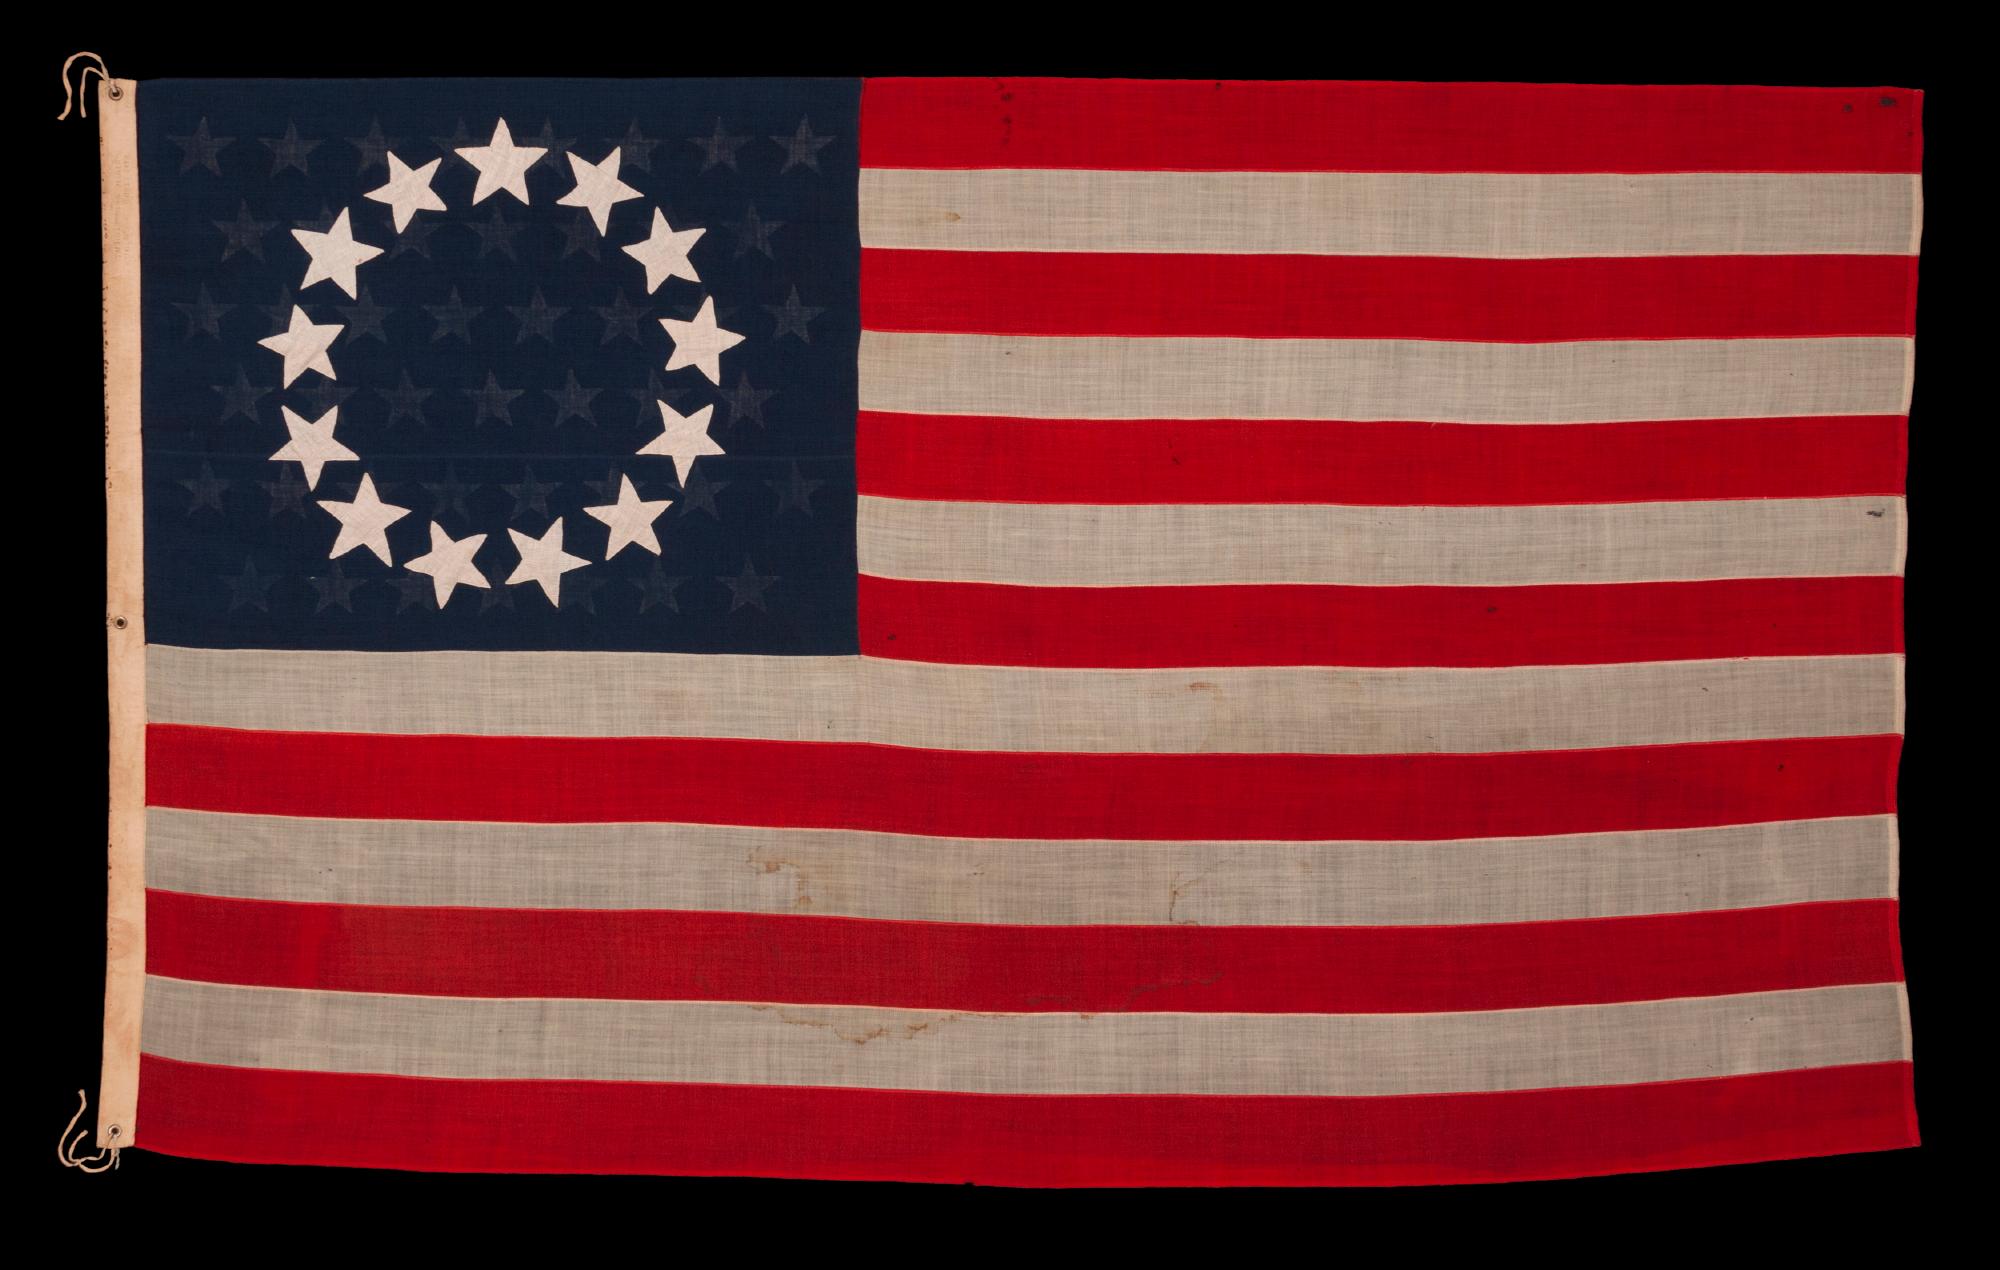 13 STARS IN THE BETSY ROSS PATTERN, WITH 45 STARS ON THE REVERSE;  ON AN ANTIQUE AMERICAN FLAG MADE AND SIGNED BY A PREVIOUSLY UNIDENTIFIED FLAG-MAKER, ANNIE MAC LACHLAN OF JERSEY CITY, NEW JERSEY, circa 1896-1908;  A RARE AND INTERESTING EXAMPLE,